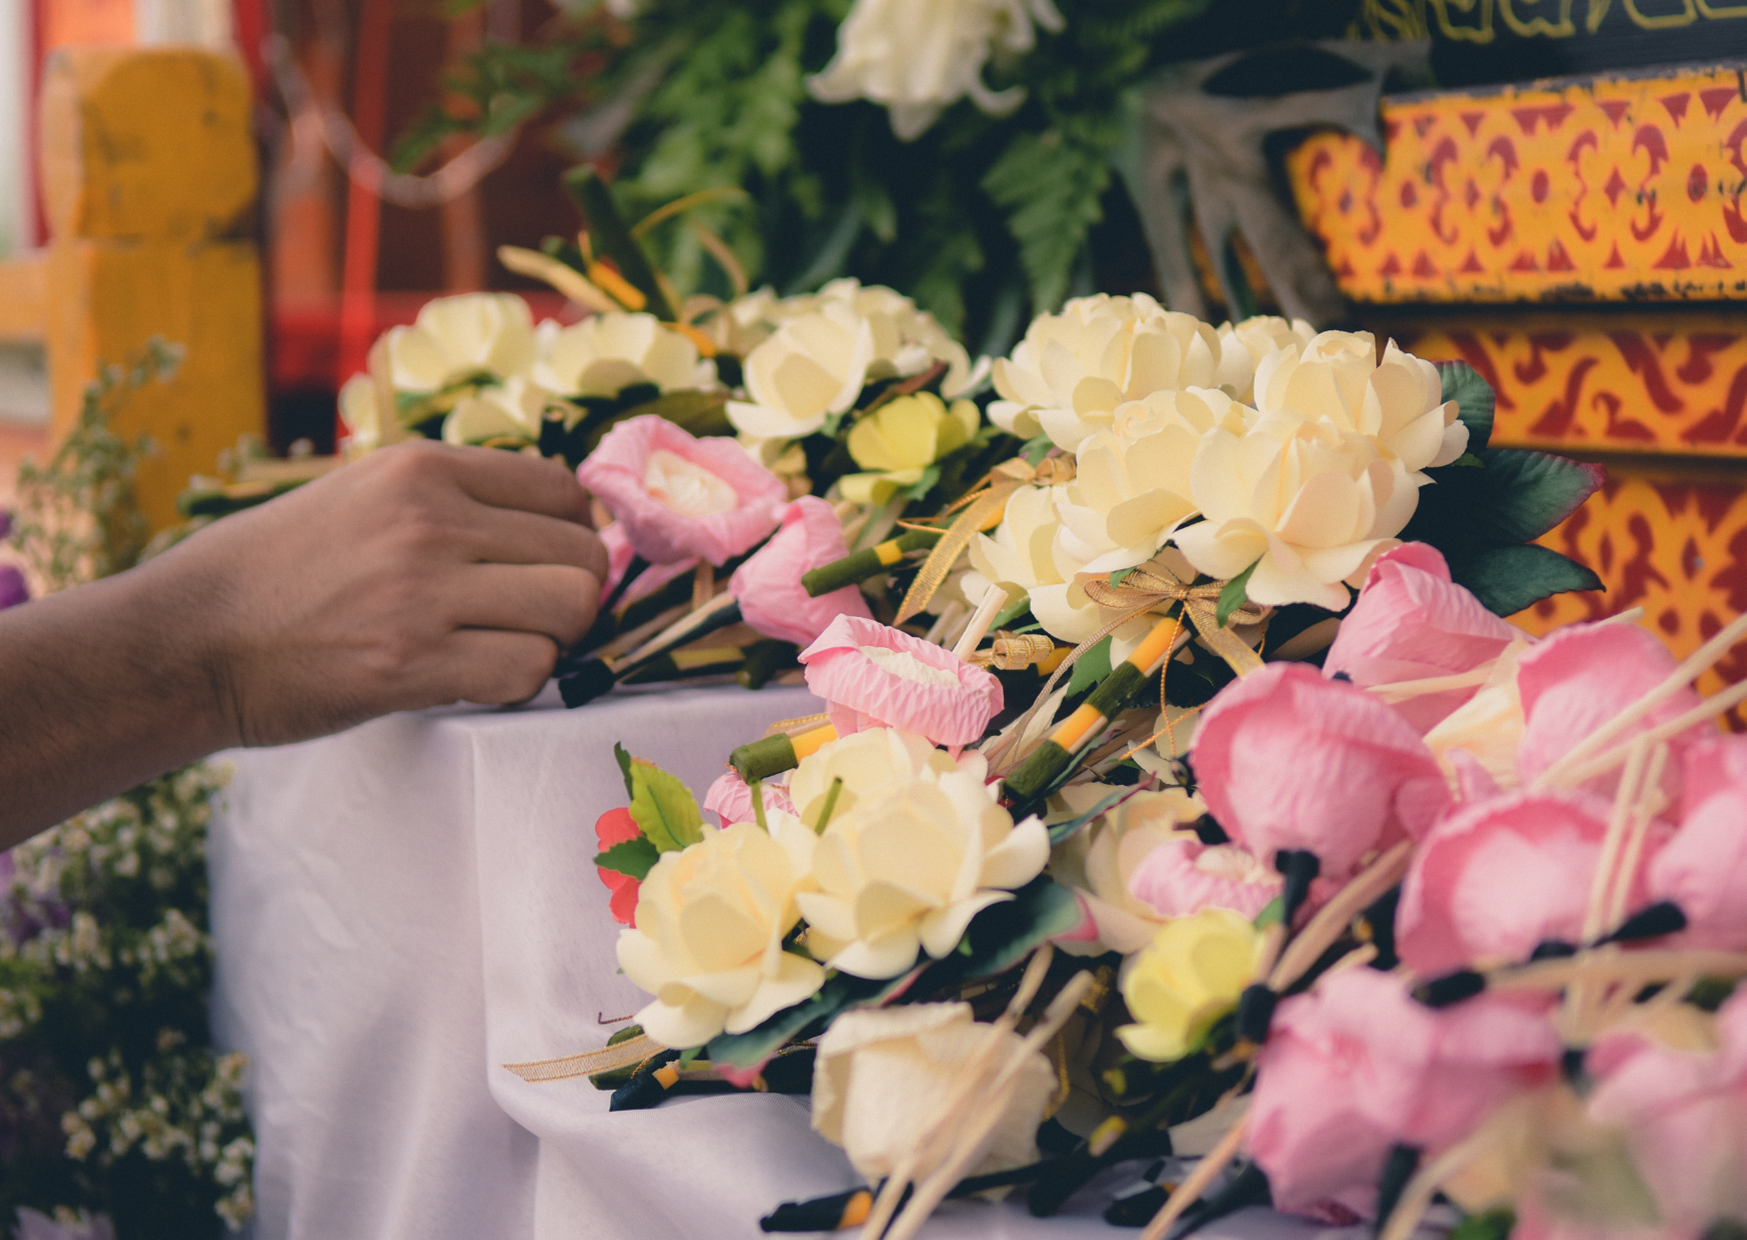 Most Popular Flowers to Express Sympathy